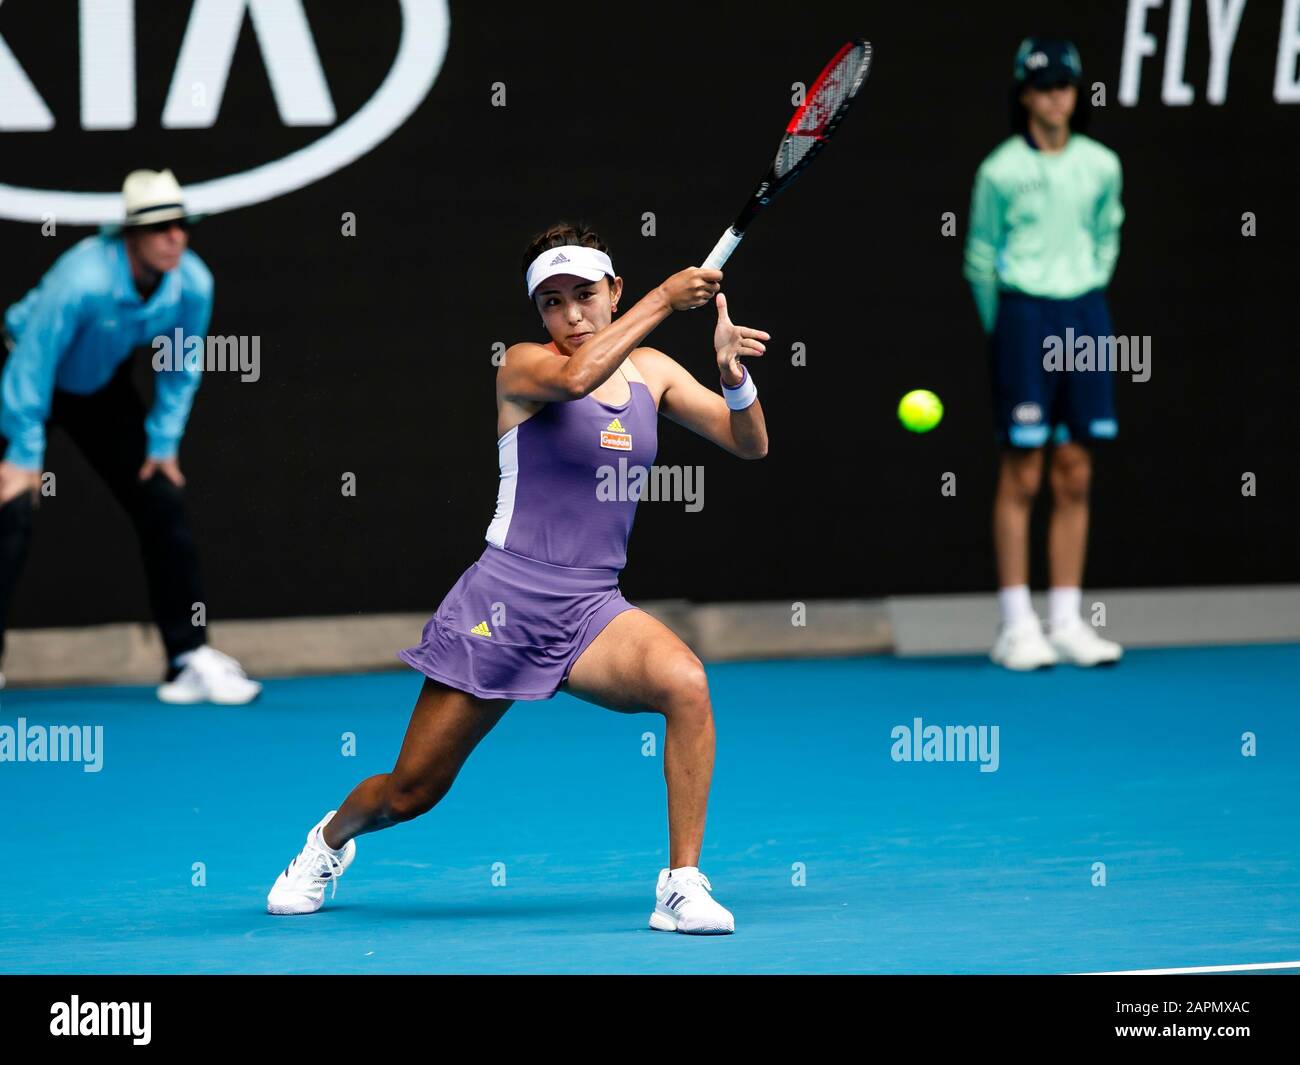 Melbourne, Australia. 24th Jan, 2020. Qiang Wang from China is in action during her third round match at the 2020 Australian Open Grand Slam tennis tournament in Melbourne, Australia. Frank Molter/Alamy Live news Stock Photo